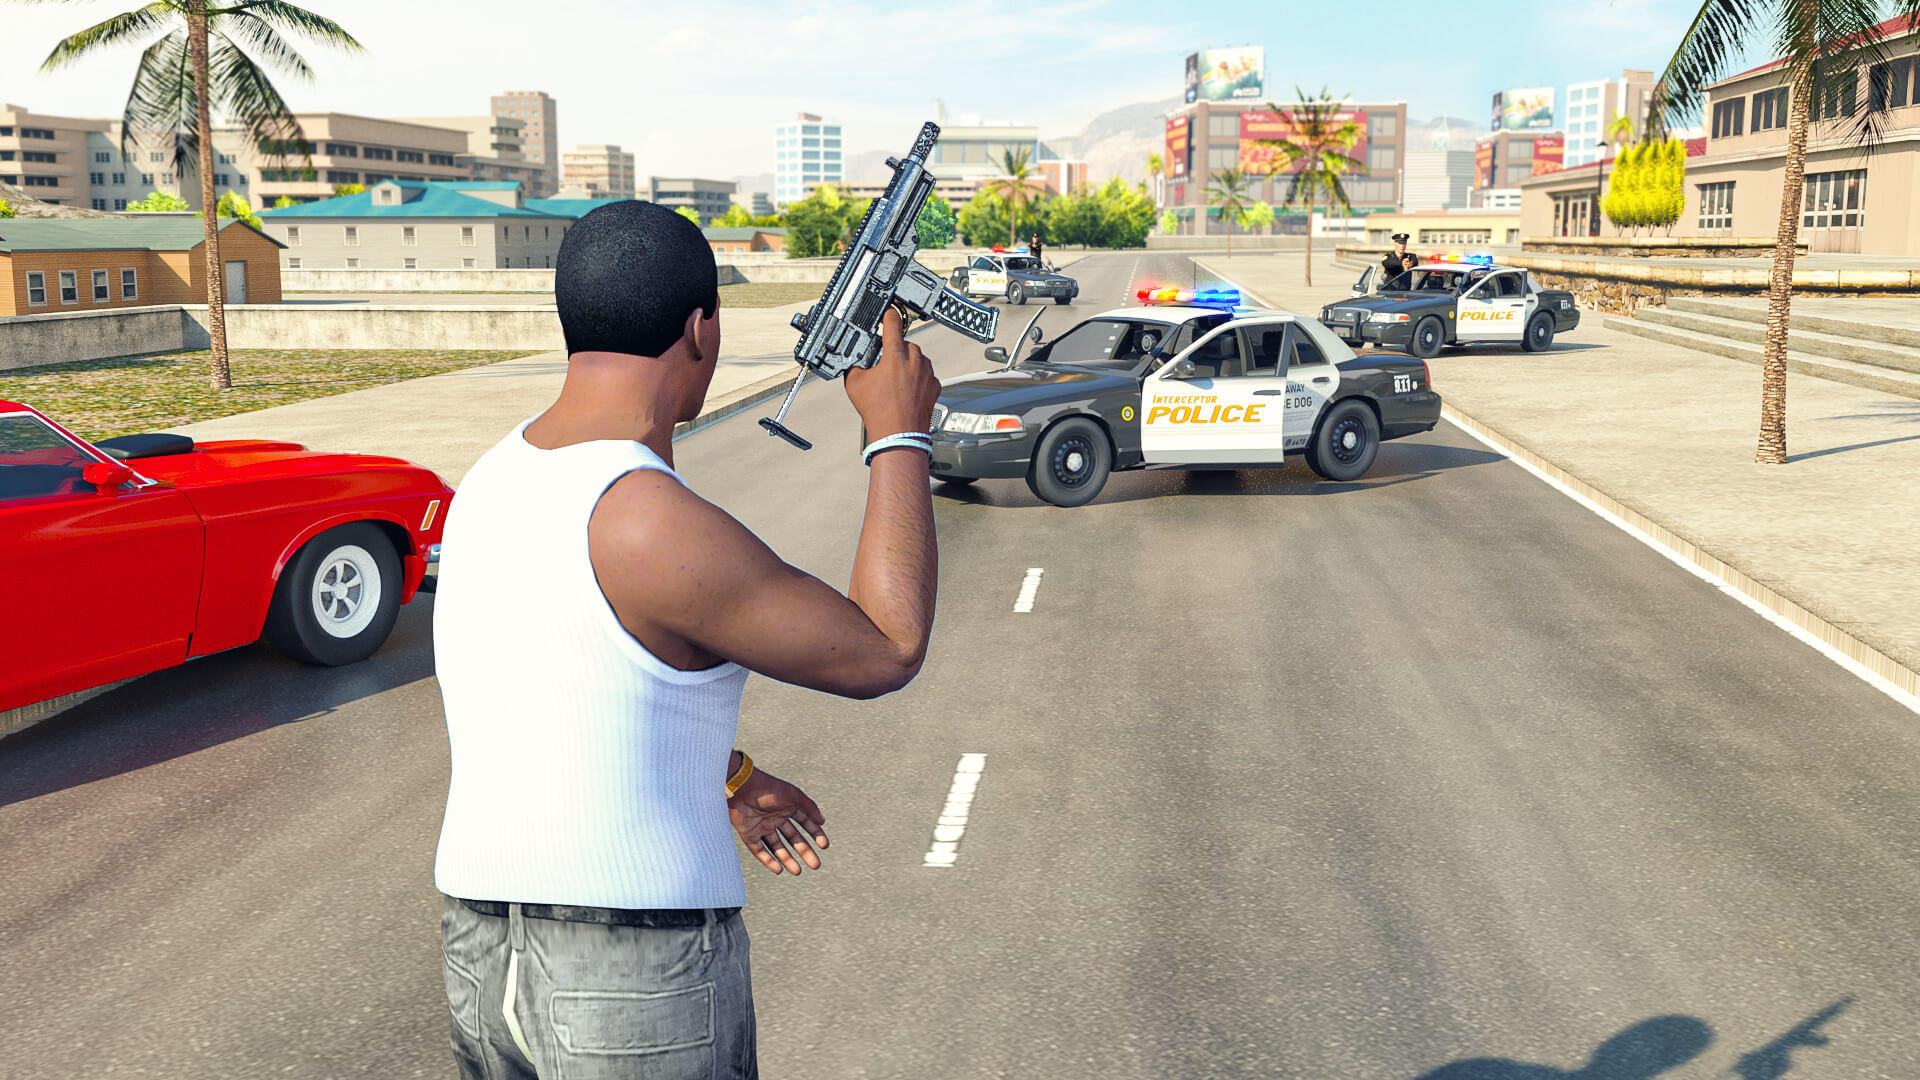 Police Duty: Crime Fighter screenshot game